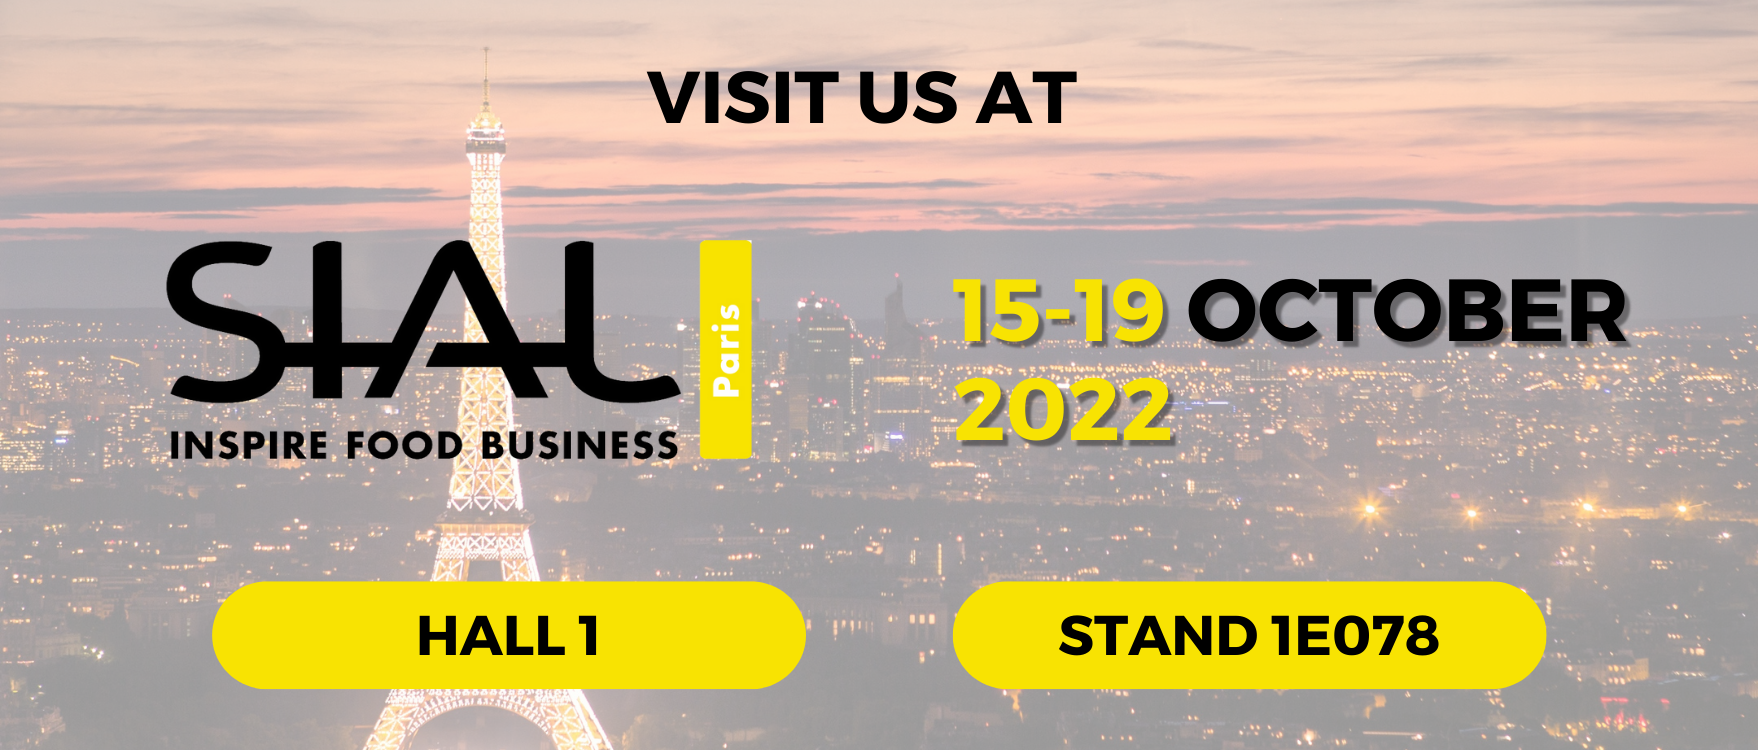 SIAL-Inspire Food Business 2022